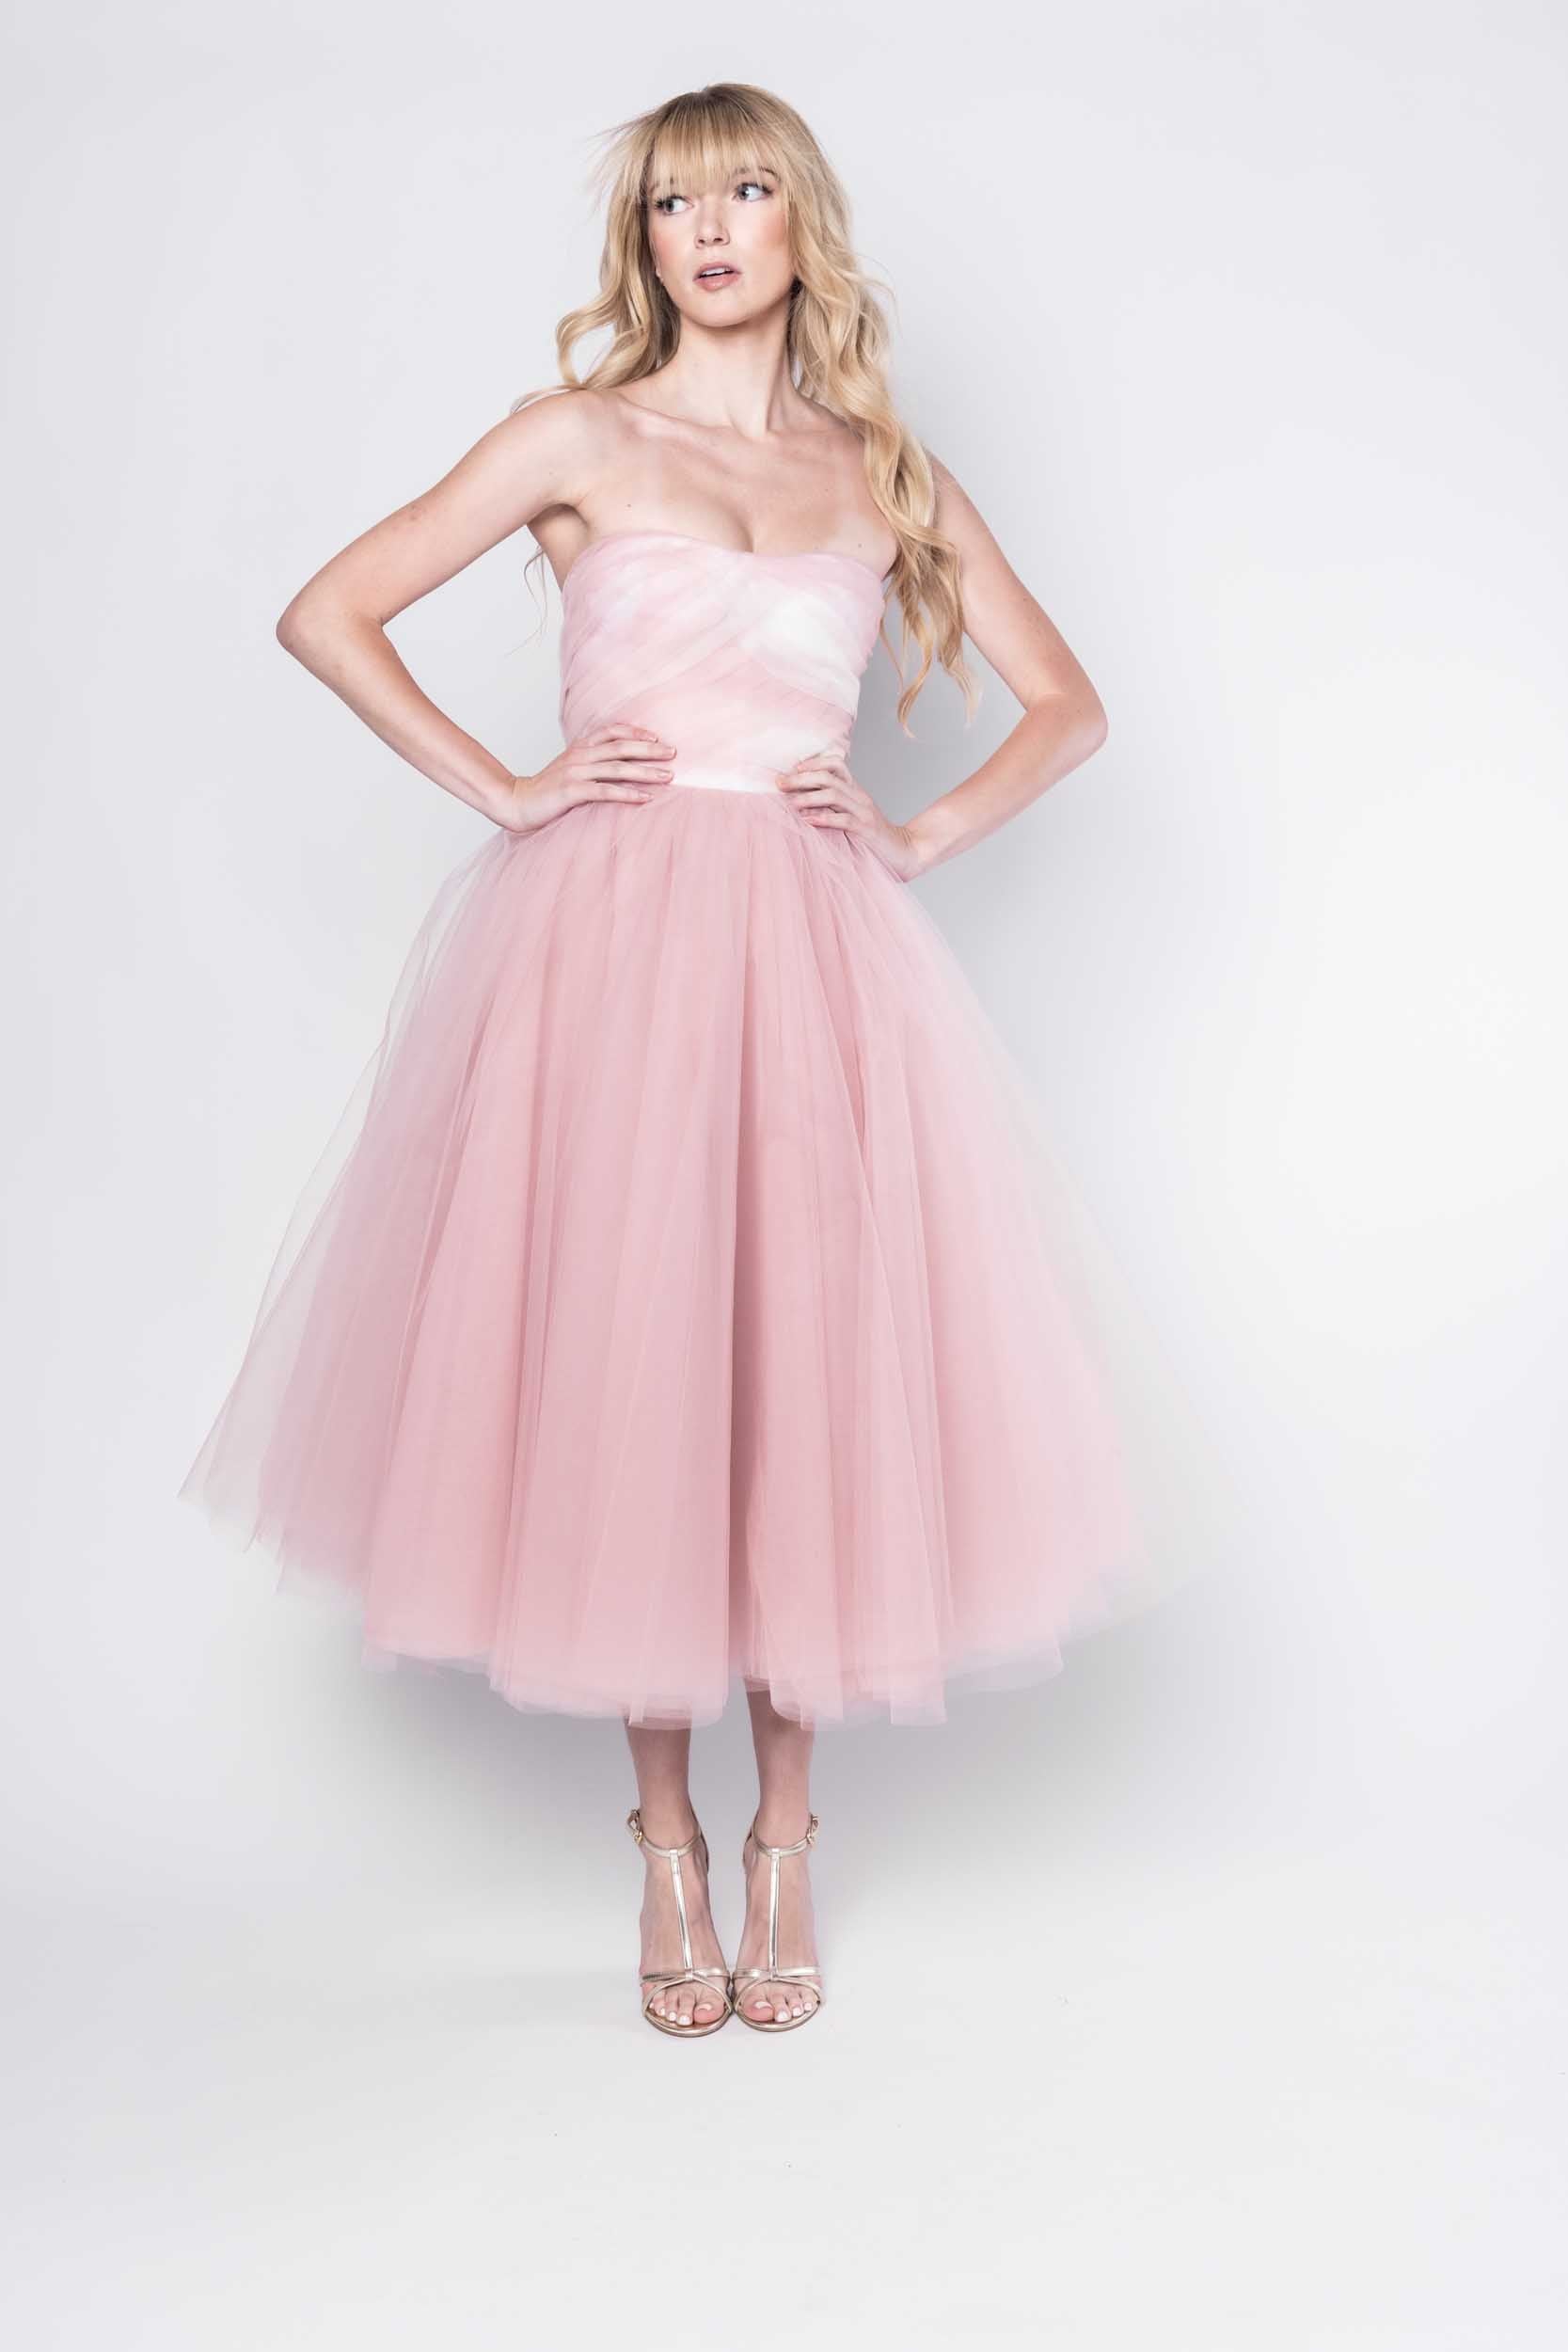 Beautiful model in a pink tulle Sujata Gazder tea-length dress - front view